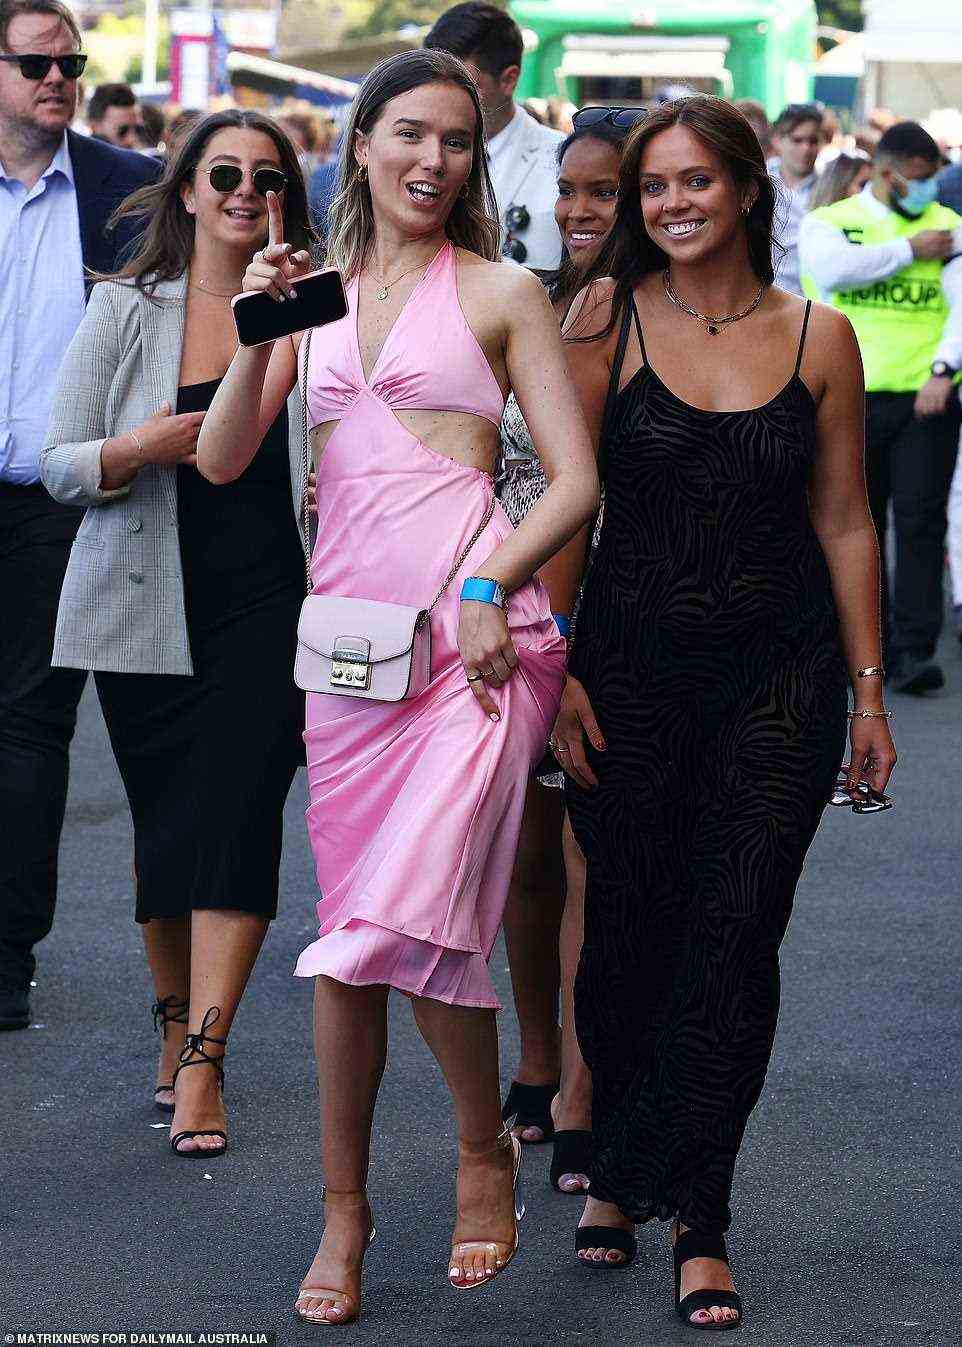 A group of friends are seen strutting their stuff as they head into the Royal Randwick Racecourse